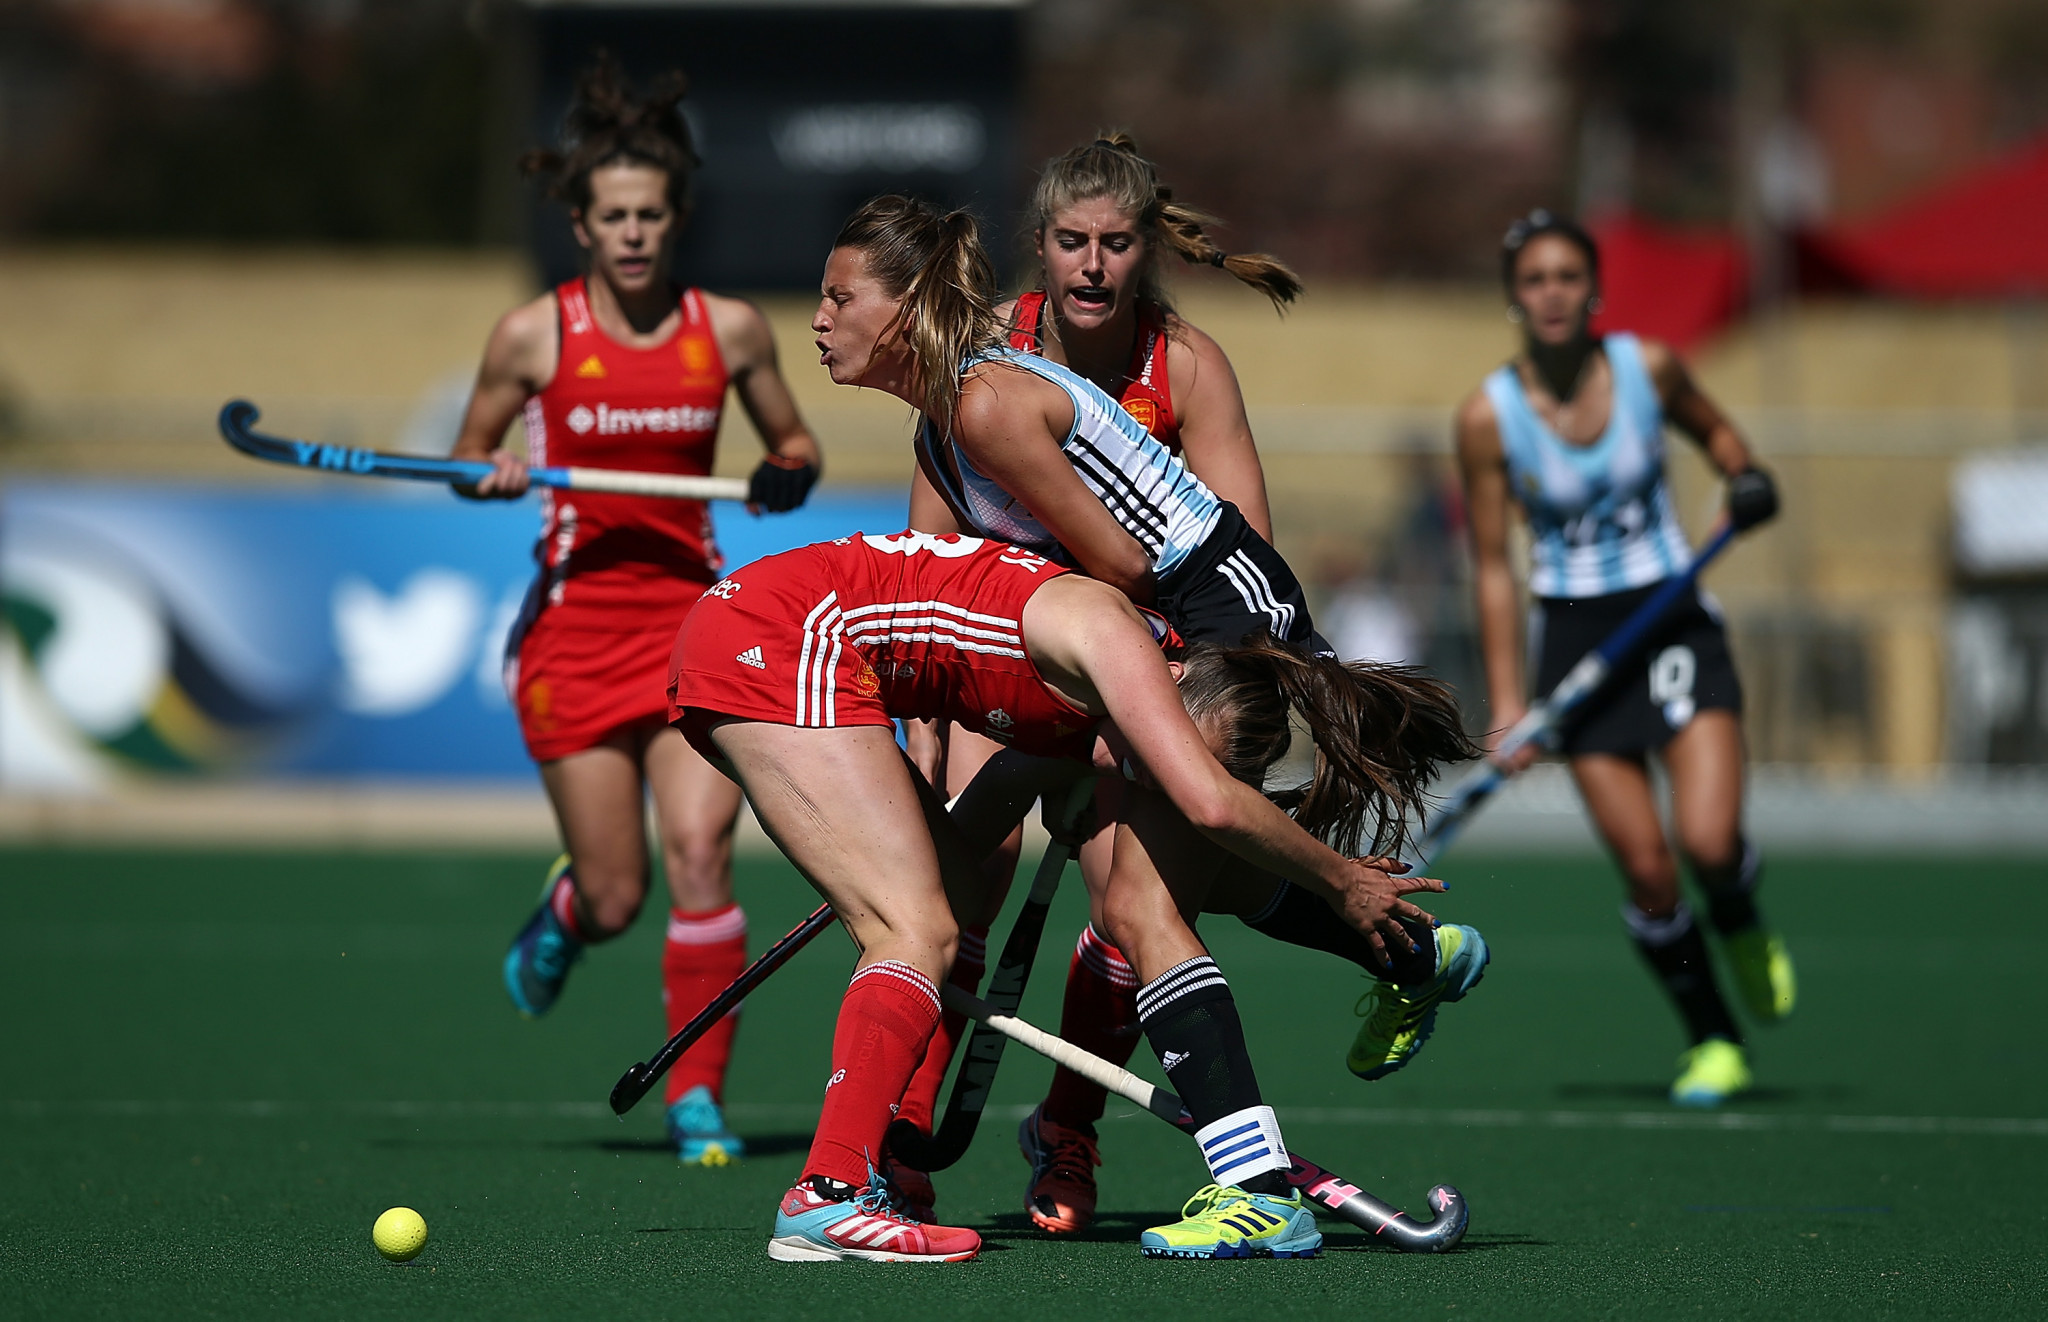 Argentina and England are among the teams due to compete at the Hockey World League Final in Auckland ©Getty Images